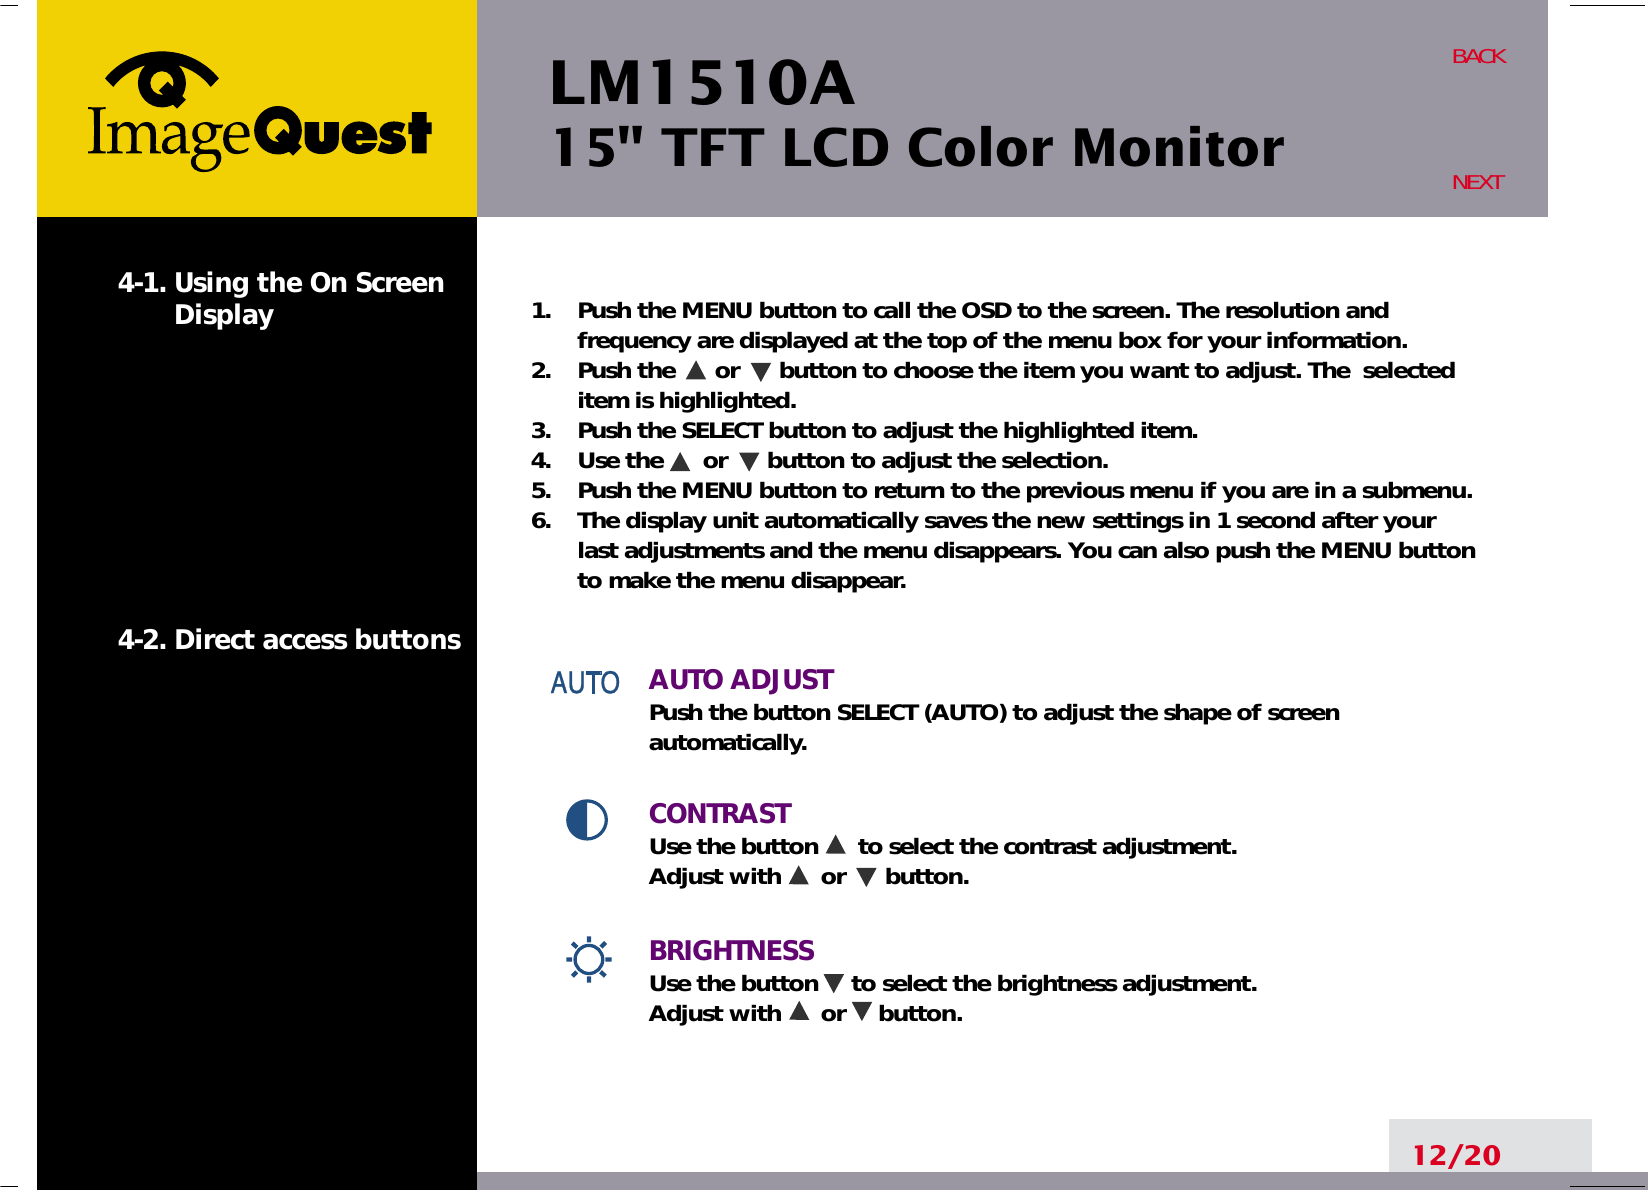 LM1510A15&quot; TFT LCD Color Monitor12/20BACKNEXT1.    Push the MENU button to call the OSD to the screen. The resolution andfrequency are displayed at the top of the menu box for your information.2.    Push the      or      button to choose the item you want to adjust. The  selecteditem is highlighted.3.    Push the SELECT button to adjust the highlighted item. 4.    Use the      or      button to adjust the selection.5.    Push the MENU button to return to the previous menu if you are in a submenu.6.    The display unit automatically saves the new settings in 1 second after yourlast adjustments and the menu disappears. You can also push the MENU buttonto make the menu disappear.AUTO ADJUSTPush the button SELECT (AUTO) to adjust the shape of screenautomatically.CONTRAST Use the button      to select the contrast adjustment. Adjust with      or      button.BRIGHTNESS  Use the button     to select the brightness adjustment. Adjust with      or     button.4-1. Using the On ScreenDisplay 4-2. Direct access buttons